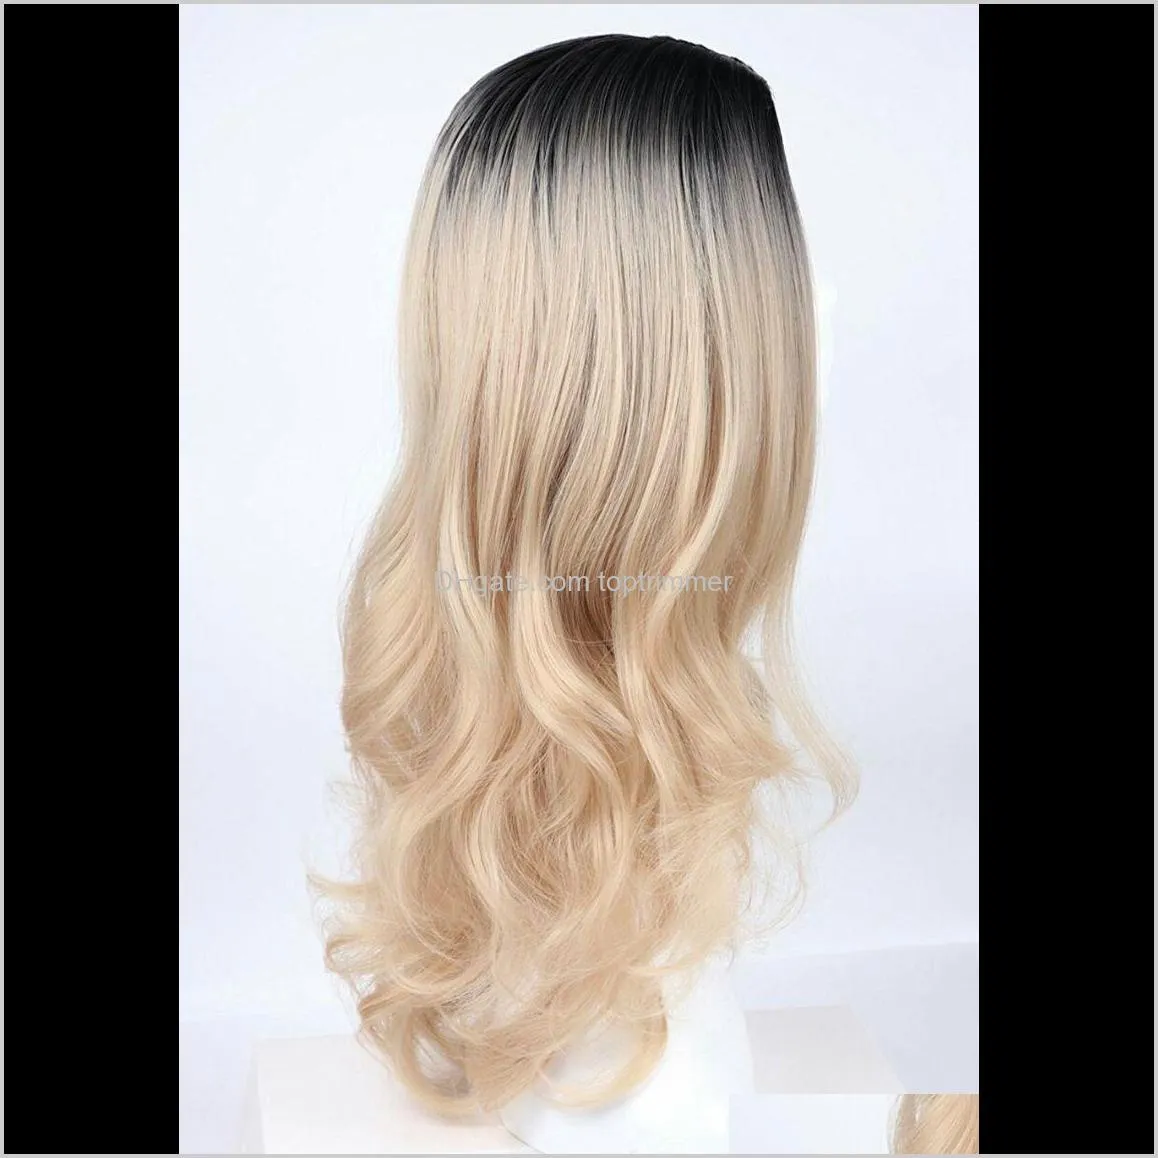 Z&F Hot Long Wavy Synthetic Wigs Fashion Hair Wigs Charming Curly Ombre Black to Blonde Color Wigs for Women